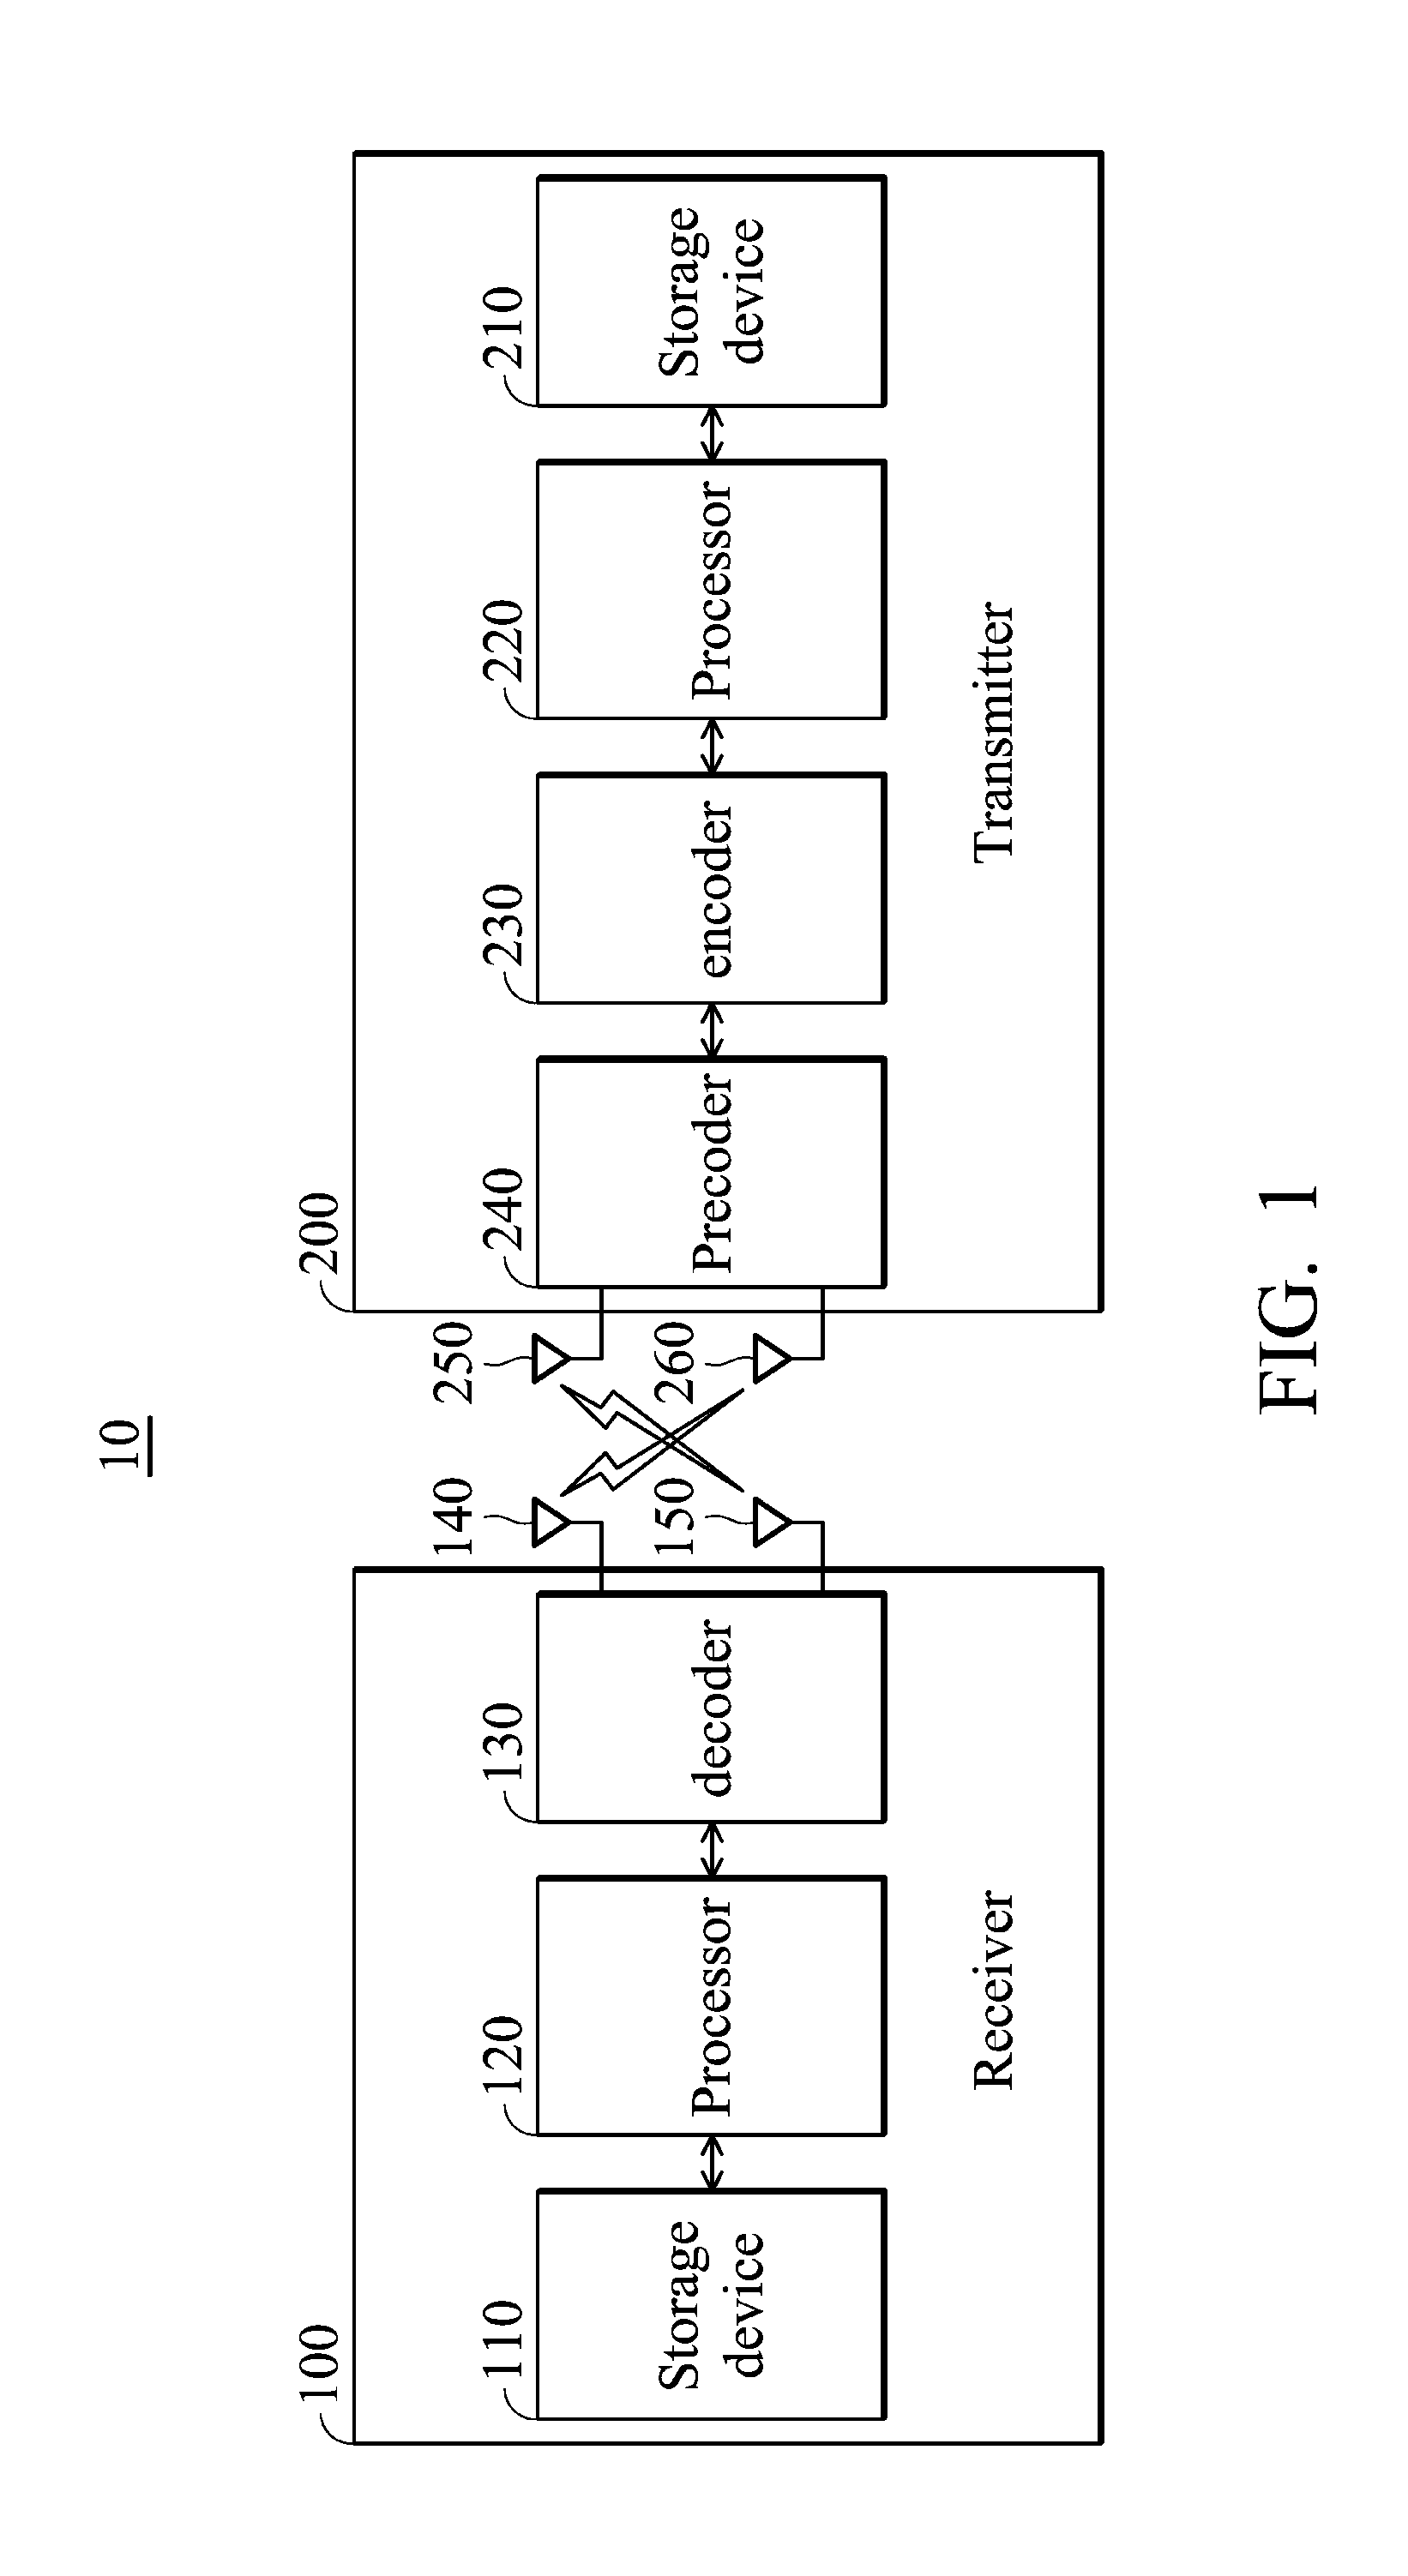 Multiple-input multiple-output systems and methods for wireless communication thereof for reducing the quantization effect of precoding operations utilizing finite codebooks